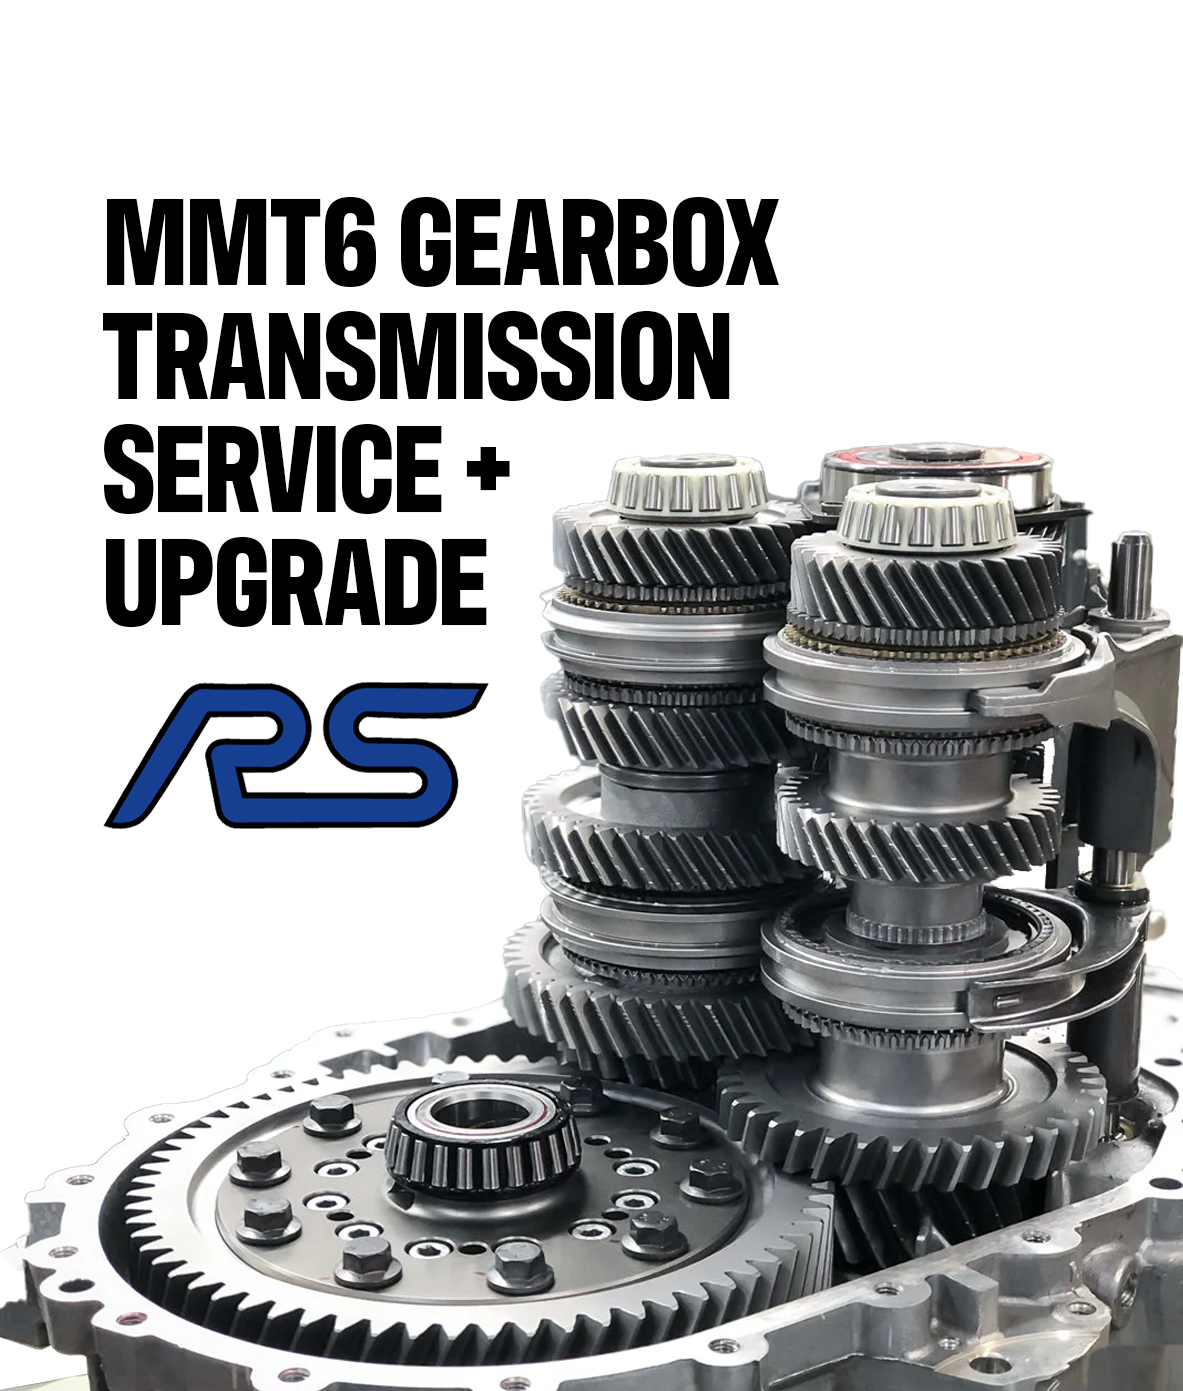 Ford MMT6 Gearbox Transmission Service and Upgrade - Focus RS – Mountune USA